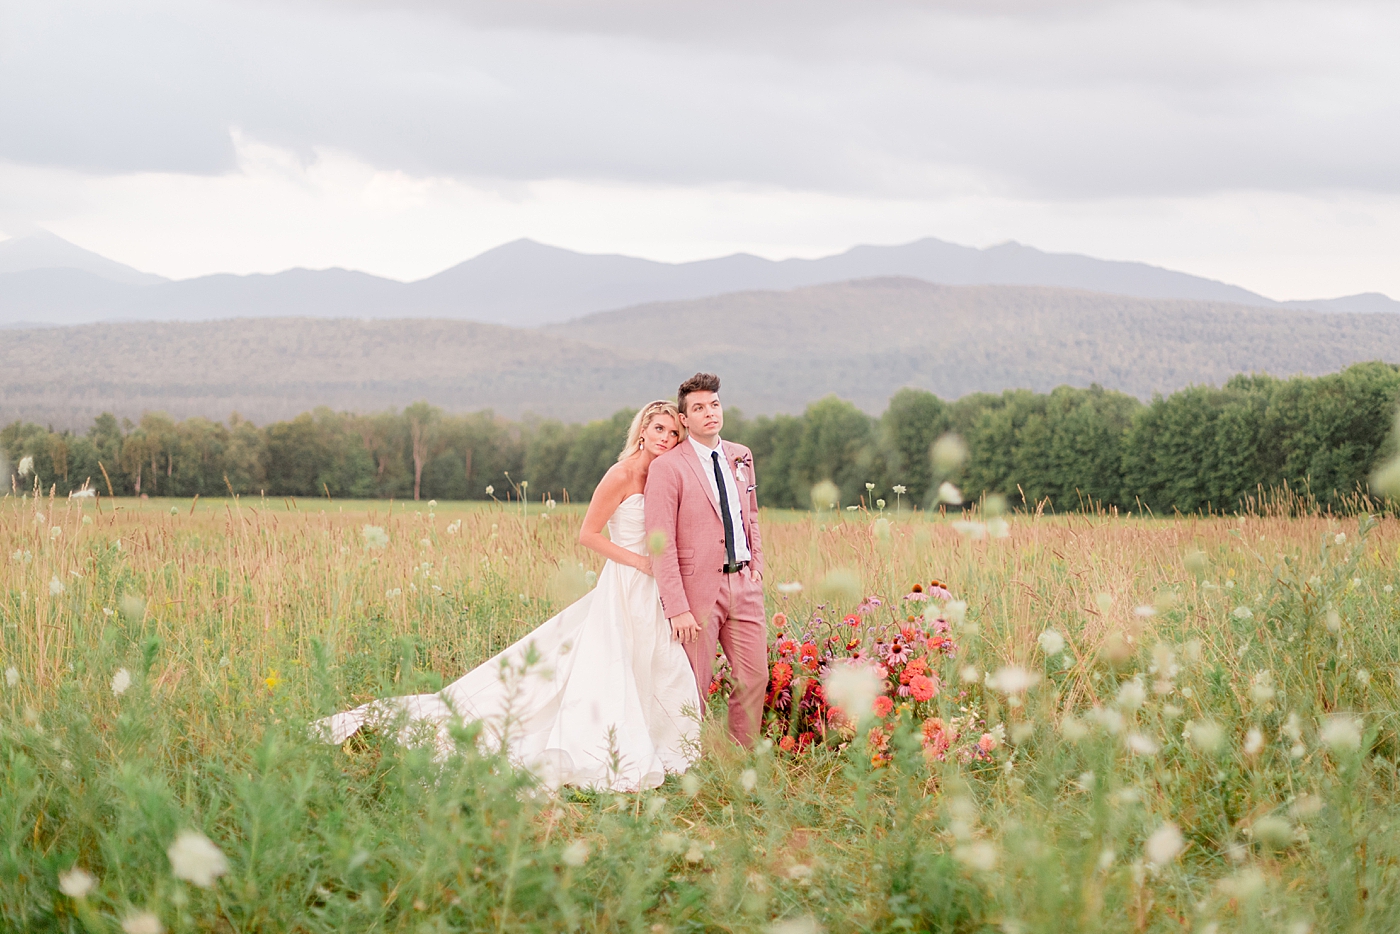 during Adirondack Mountain Elopement Weekend | Image by Hope Helmuth Photography